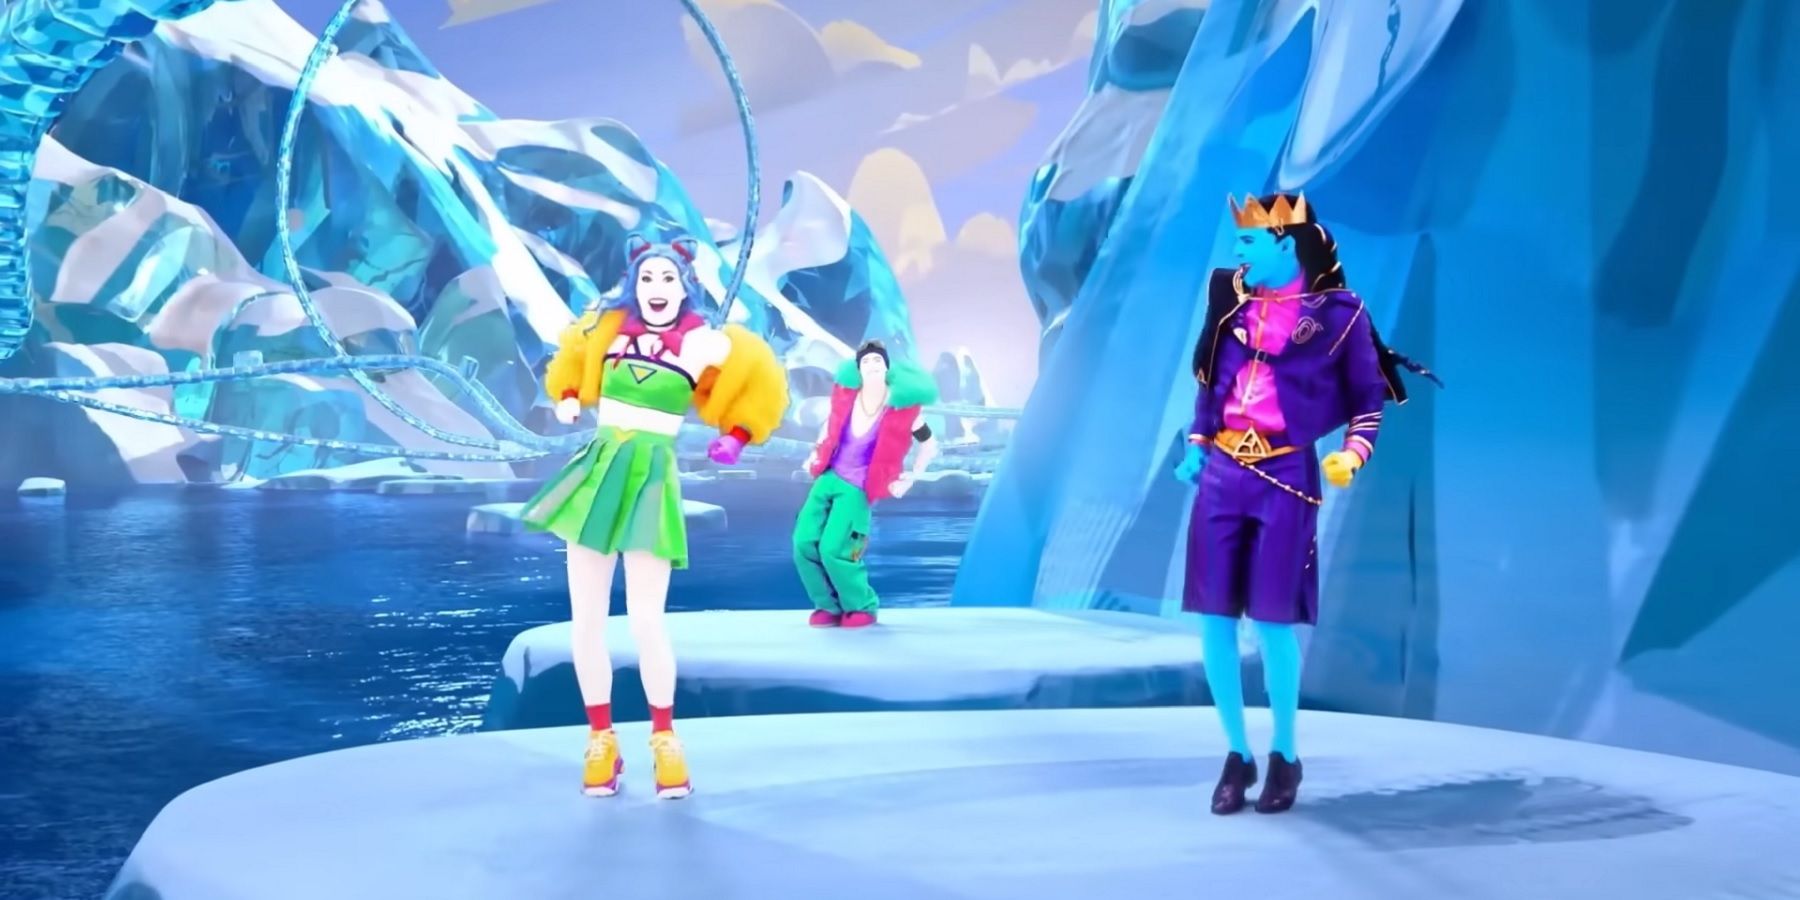 Just dance 2023 characters